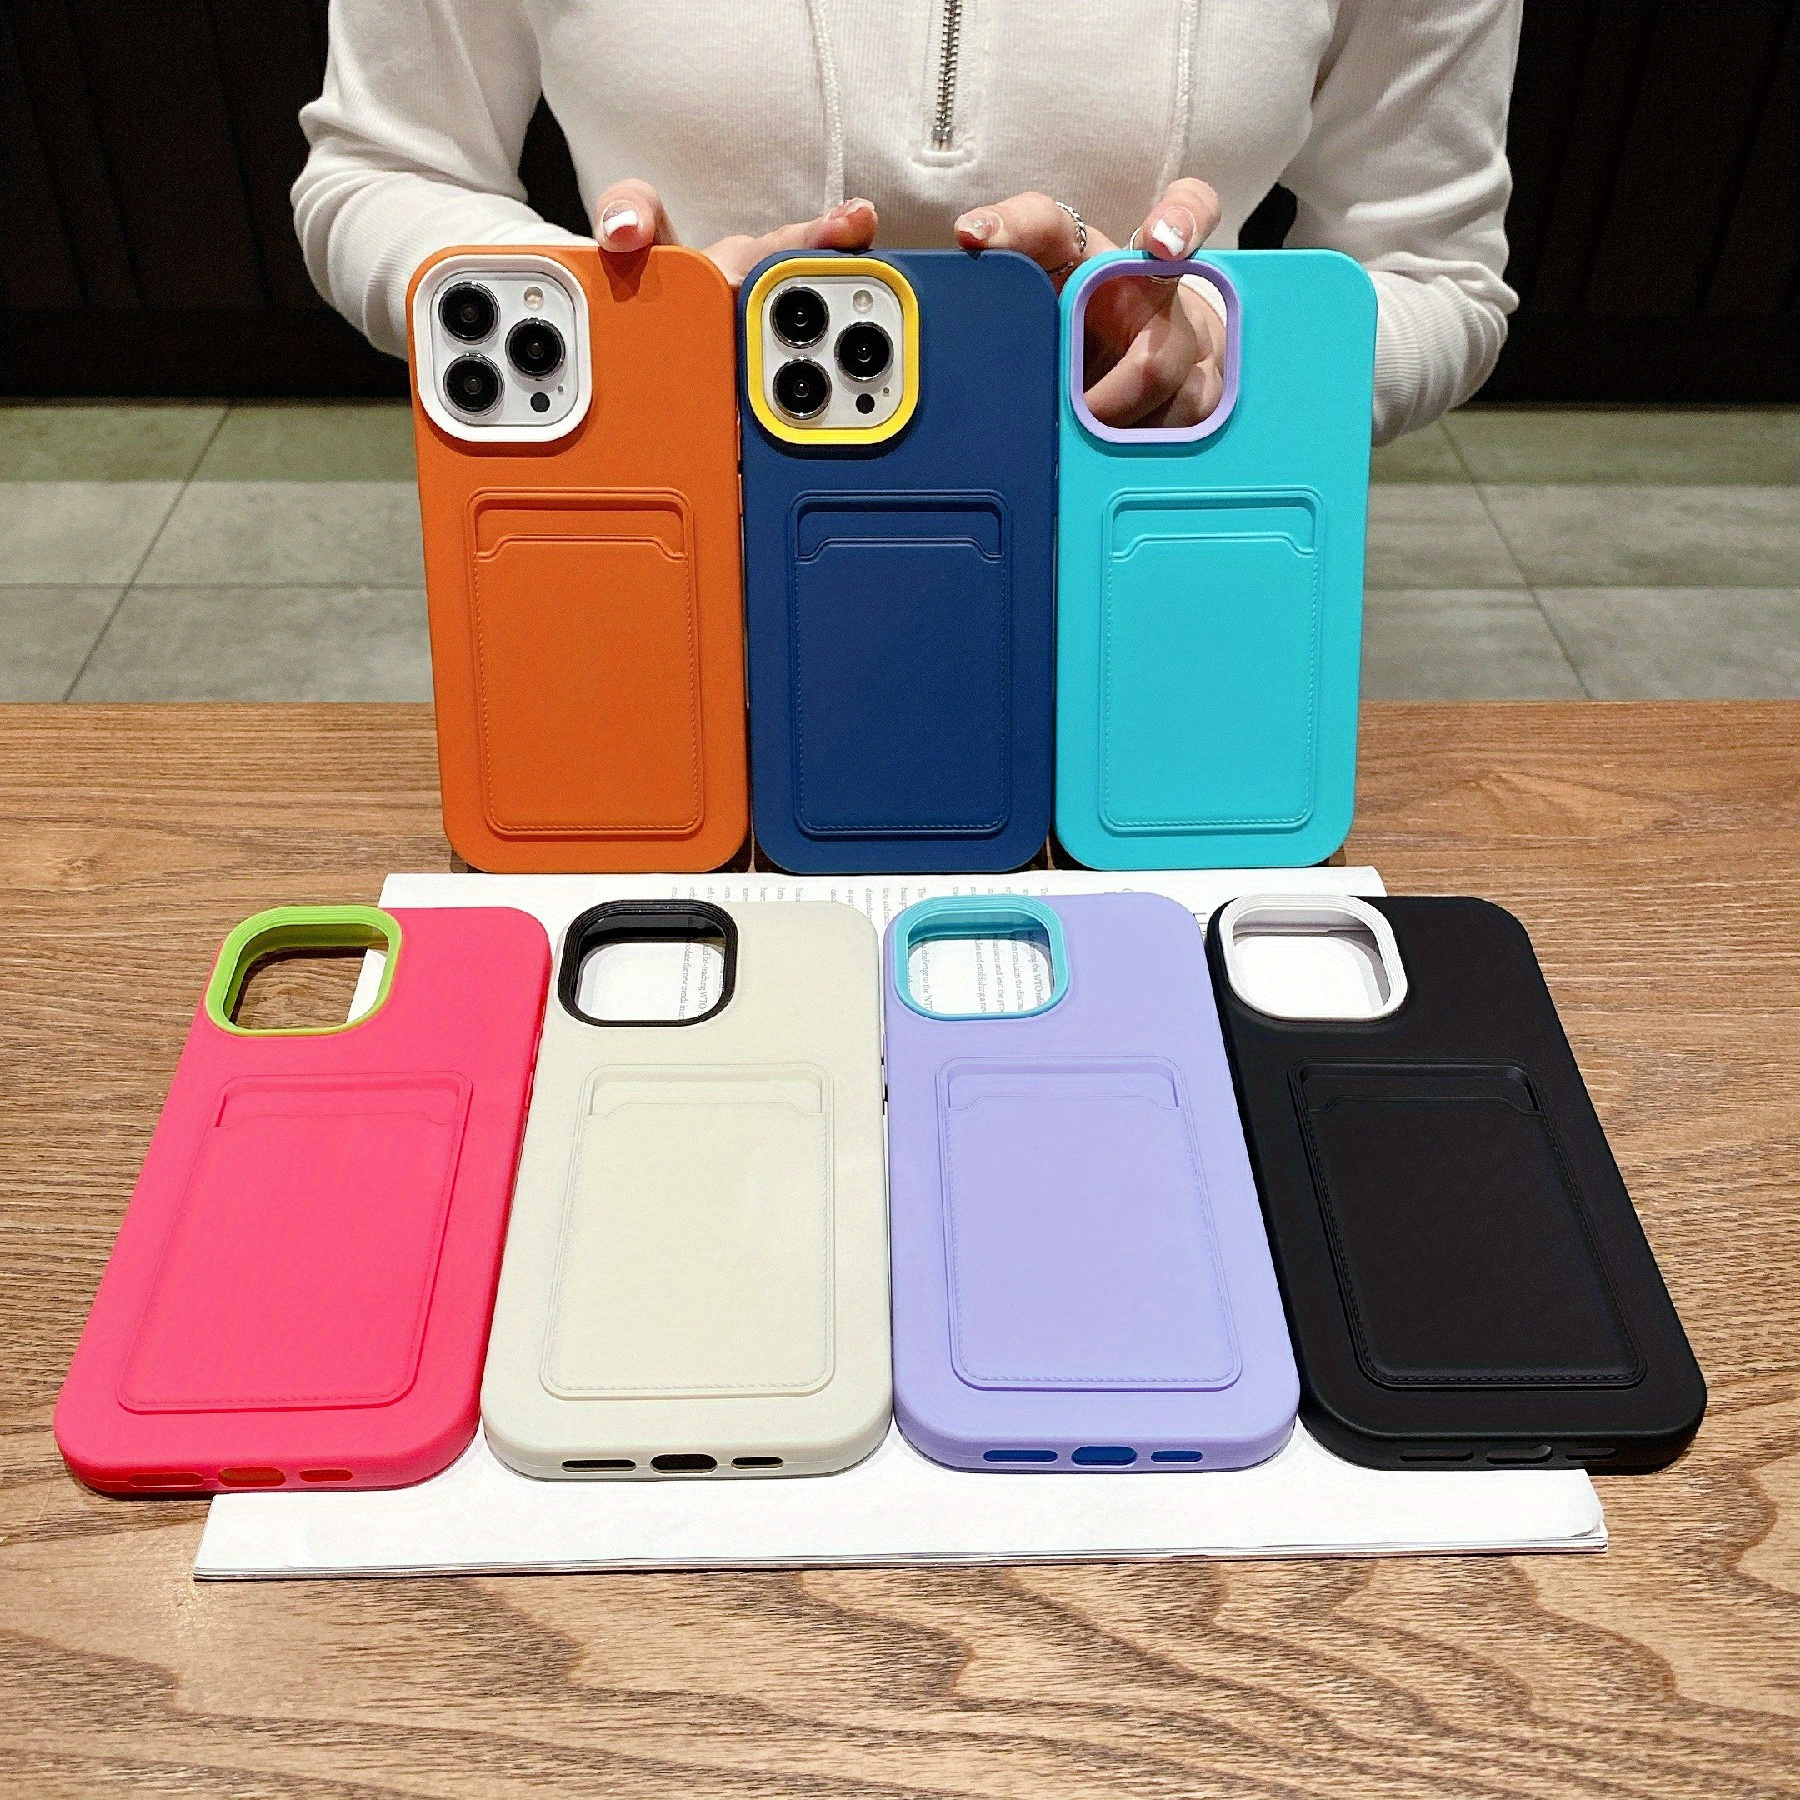 

Tpu Liquid Skin Texture Card Holder Case For 15, 14, 13, 12, 11, Plus, Pro Max - Street Style Fashion Protective Cover With Anti-slip Grip, Shockproof And Full Coverage Design - 7 Colors Available